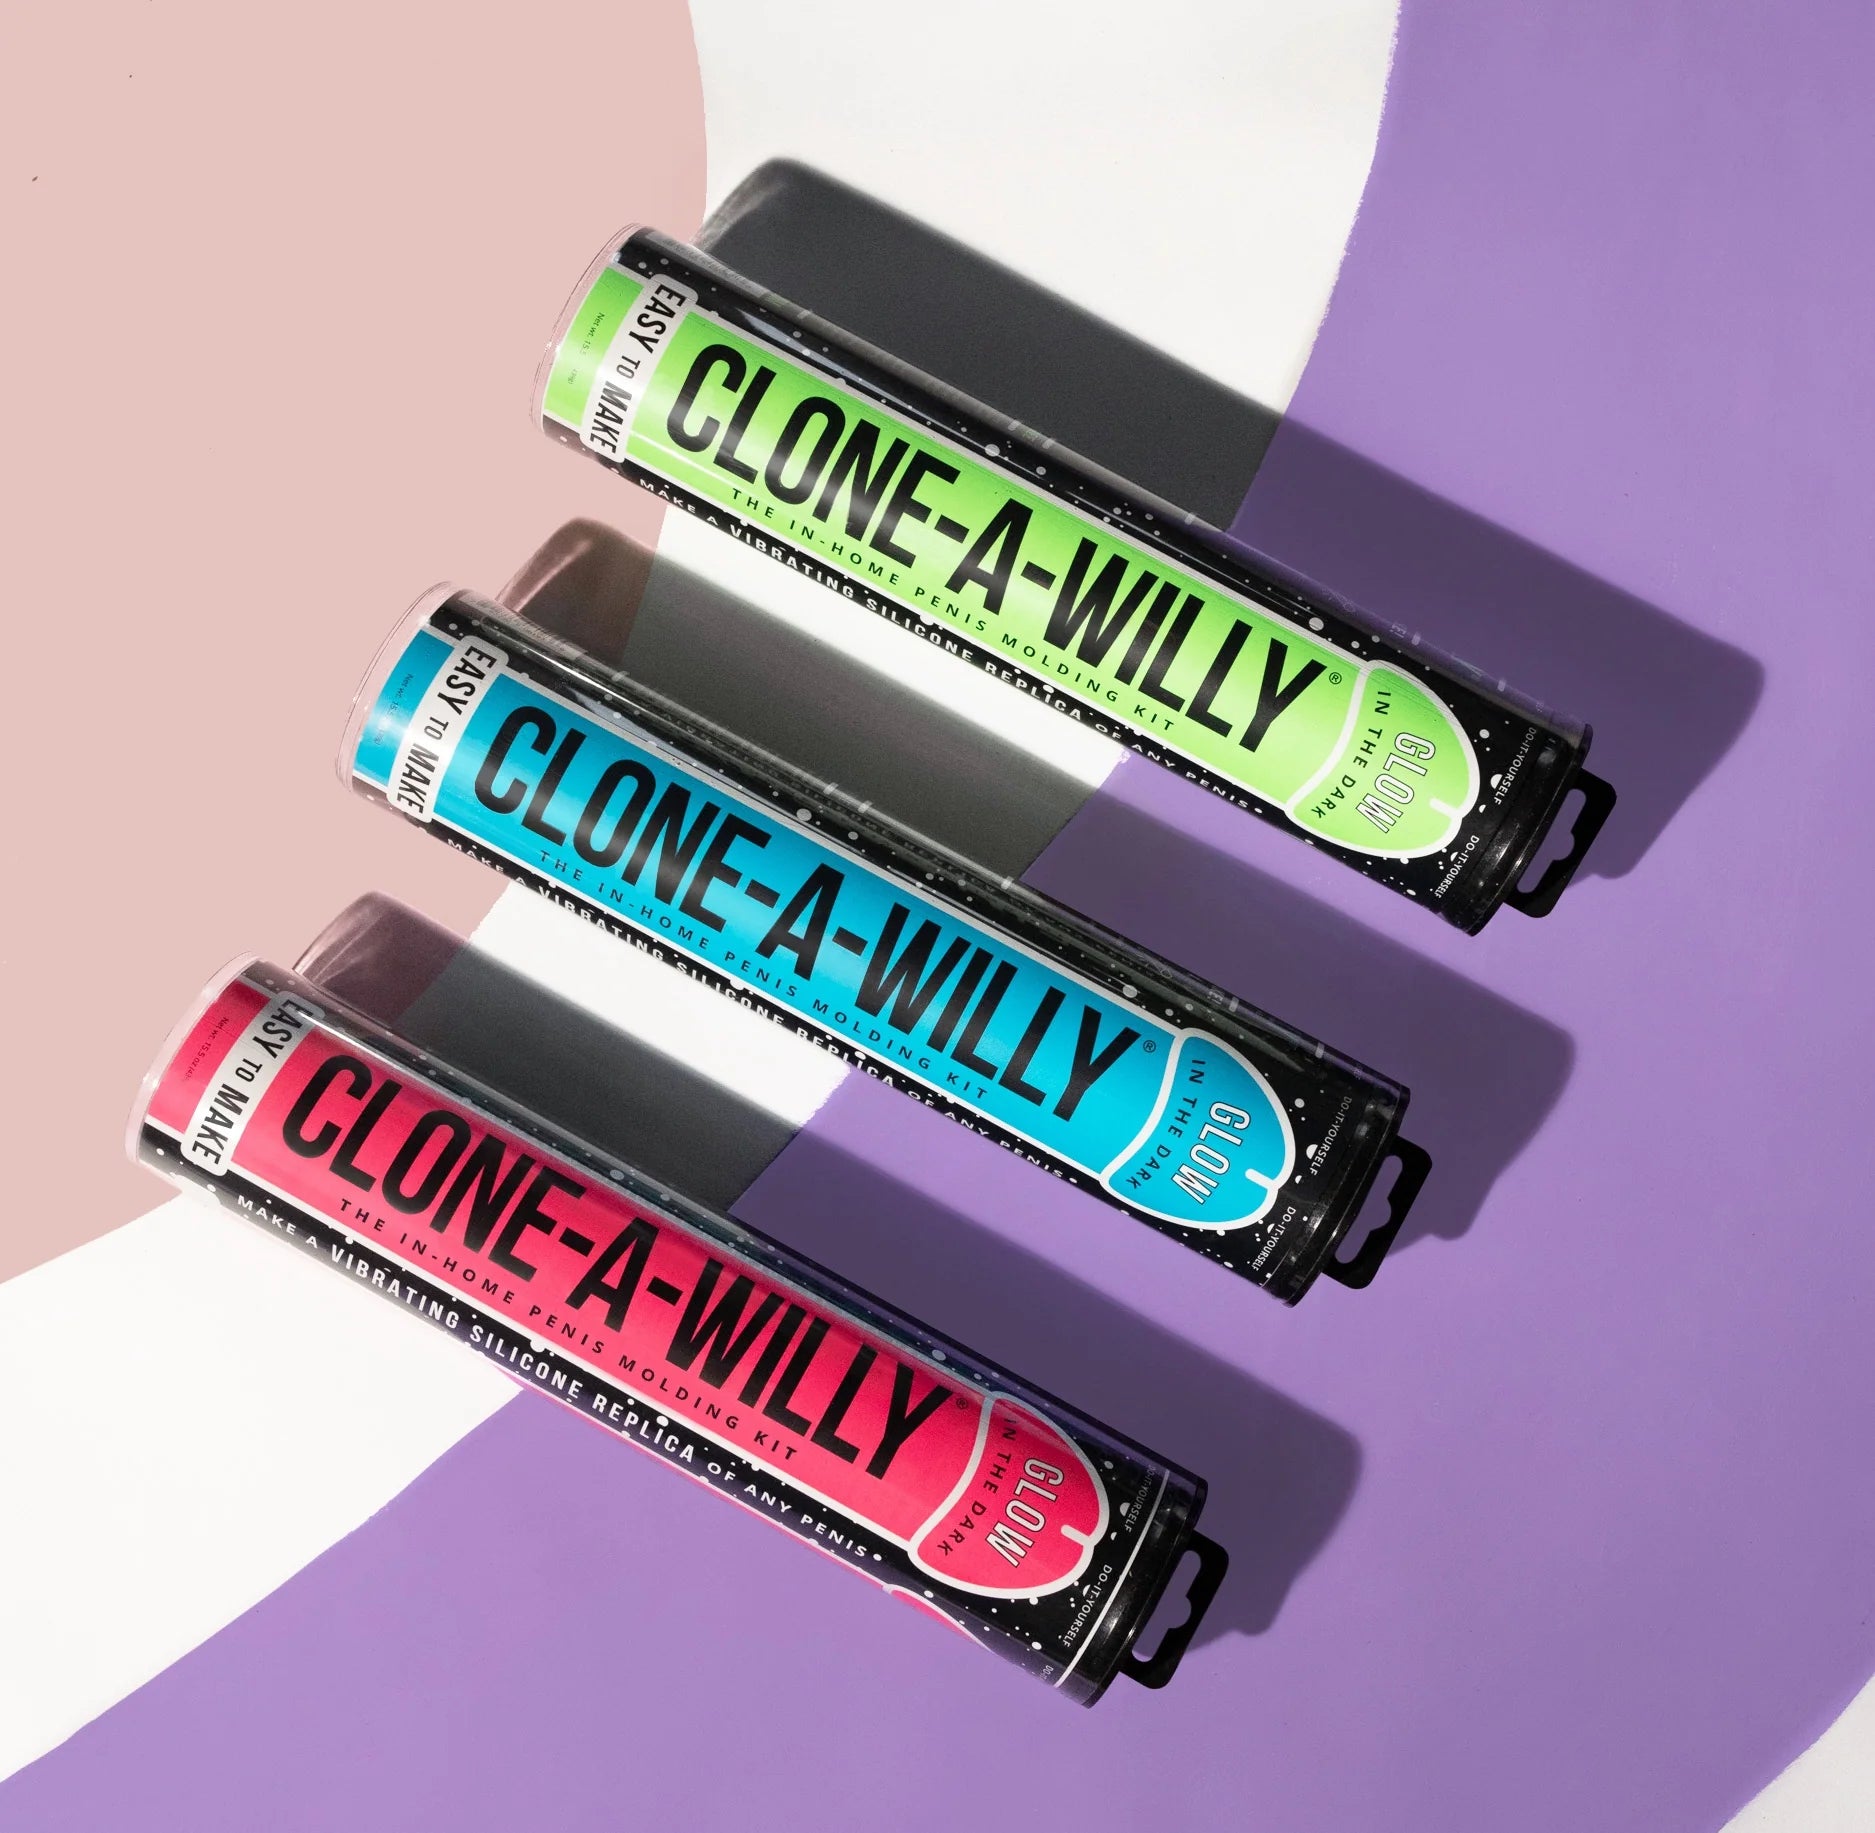 Clone-a-willy branded packaging